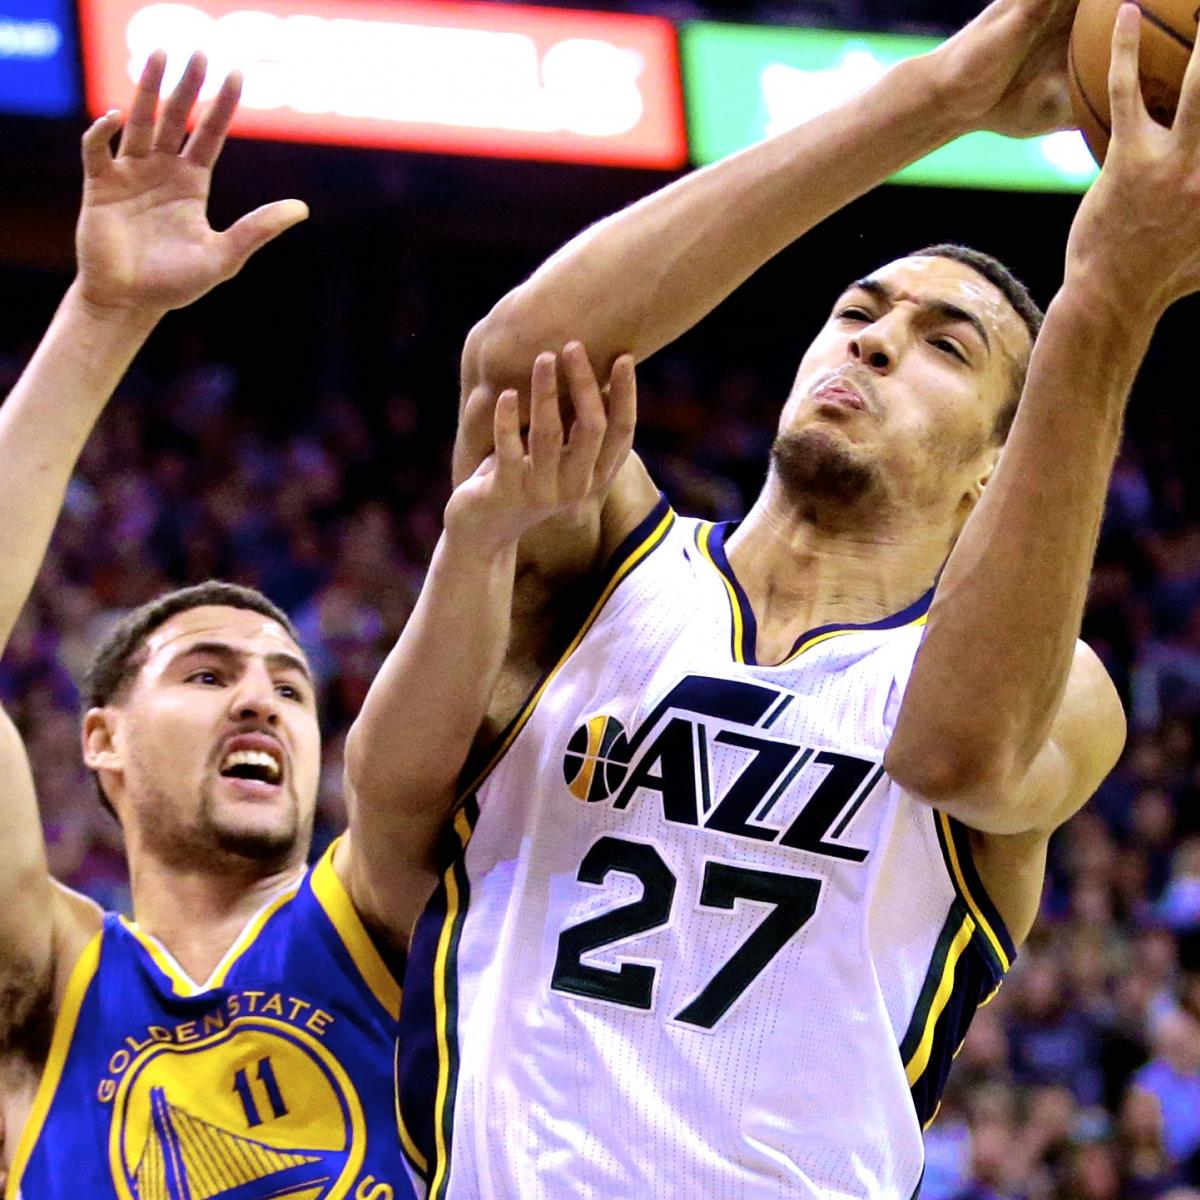 Klay Thompson's Fix for His Shooting Woes? Unearthing His Alter